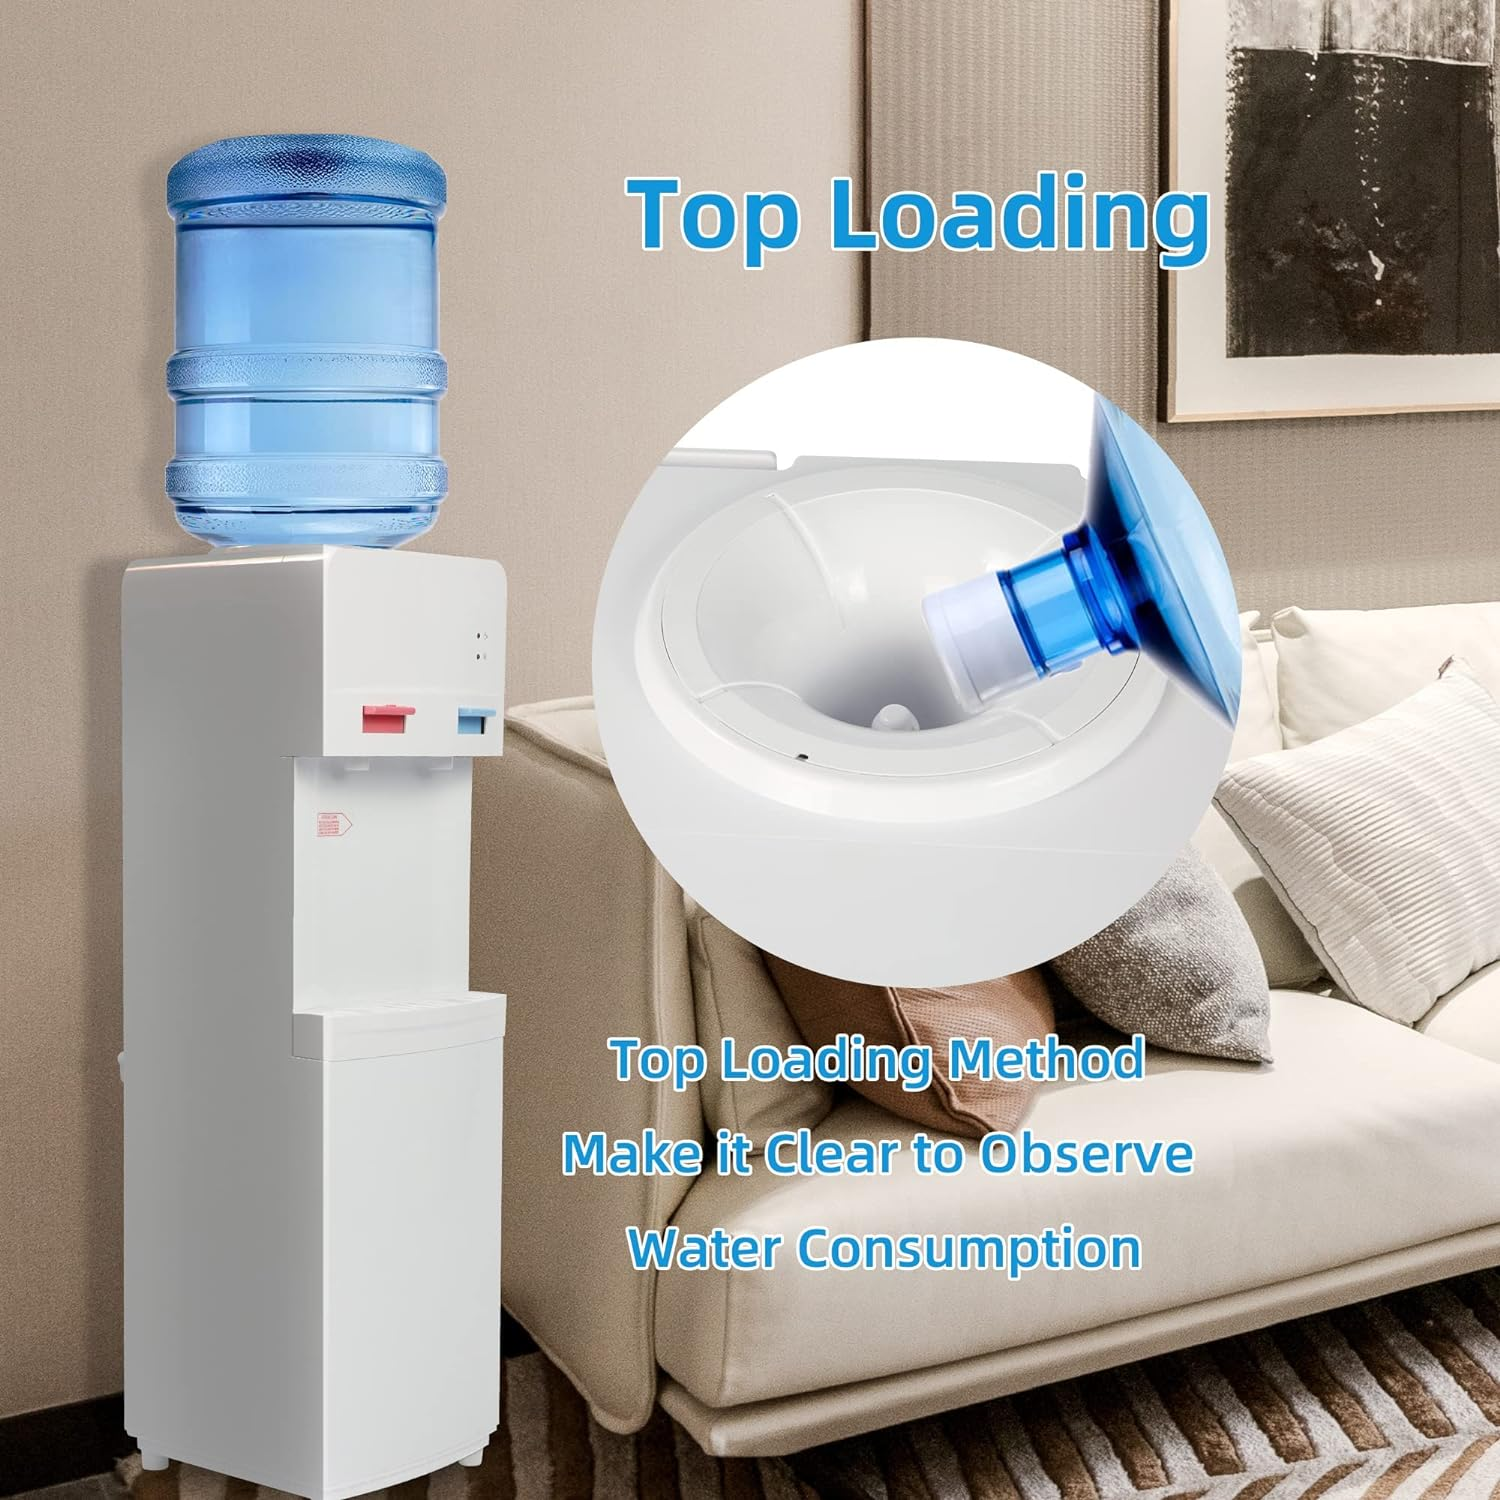 5 Gallons Hot and Cold Top Loading Water Cooler Dispenser with Child Safety Lock, White